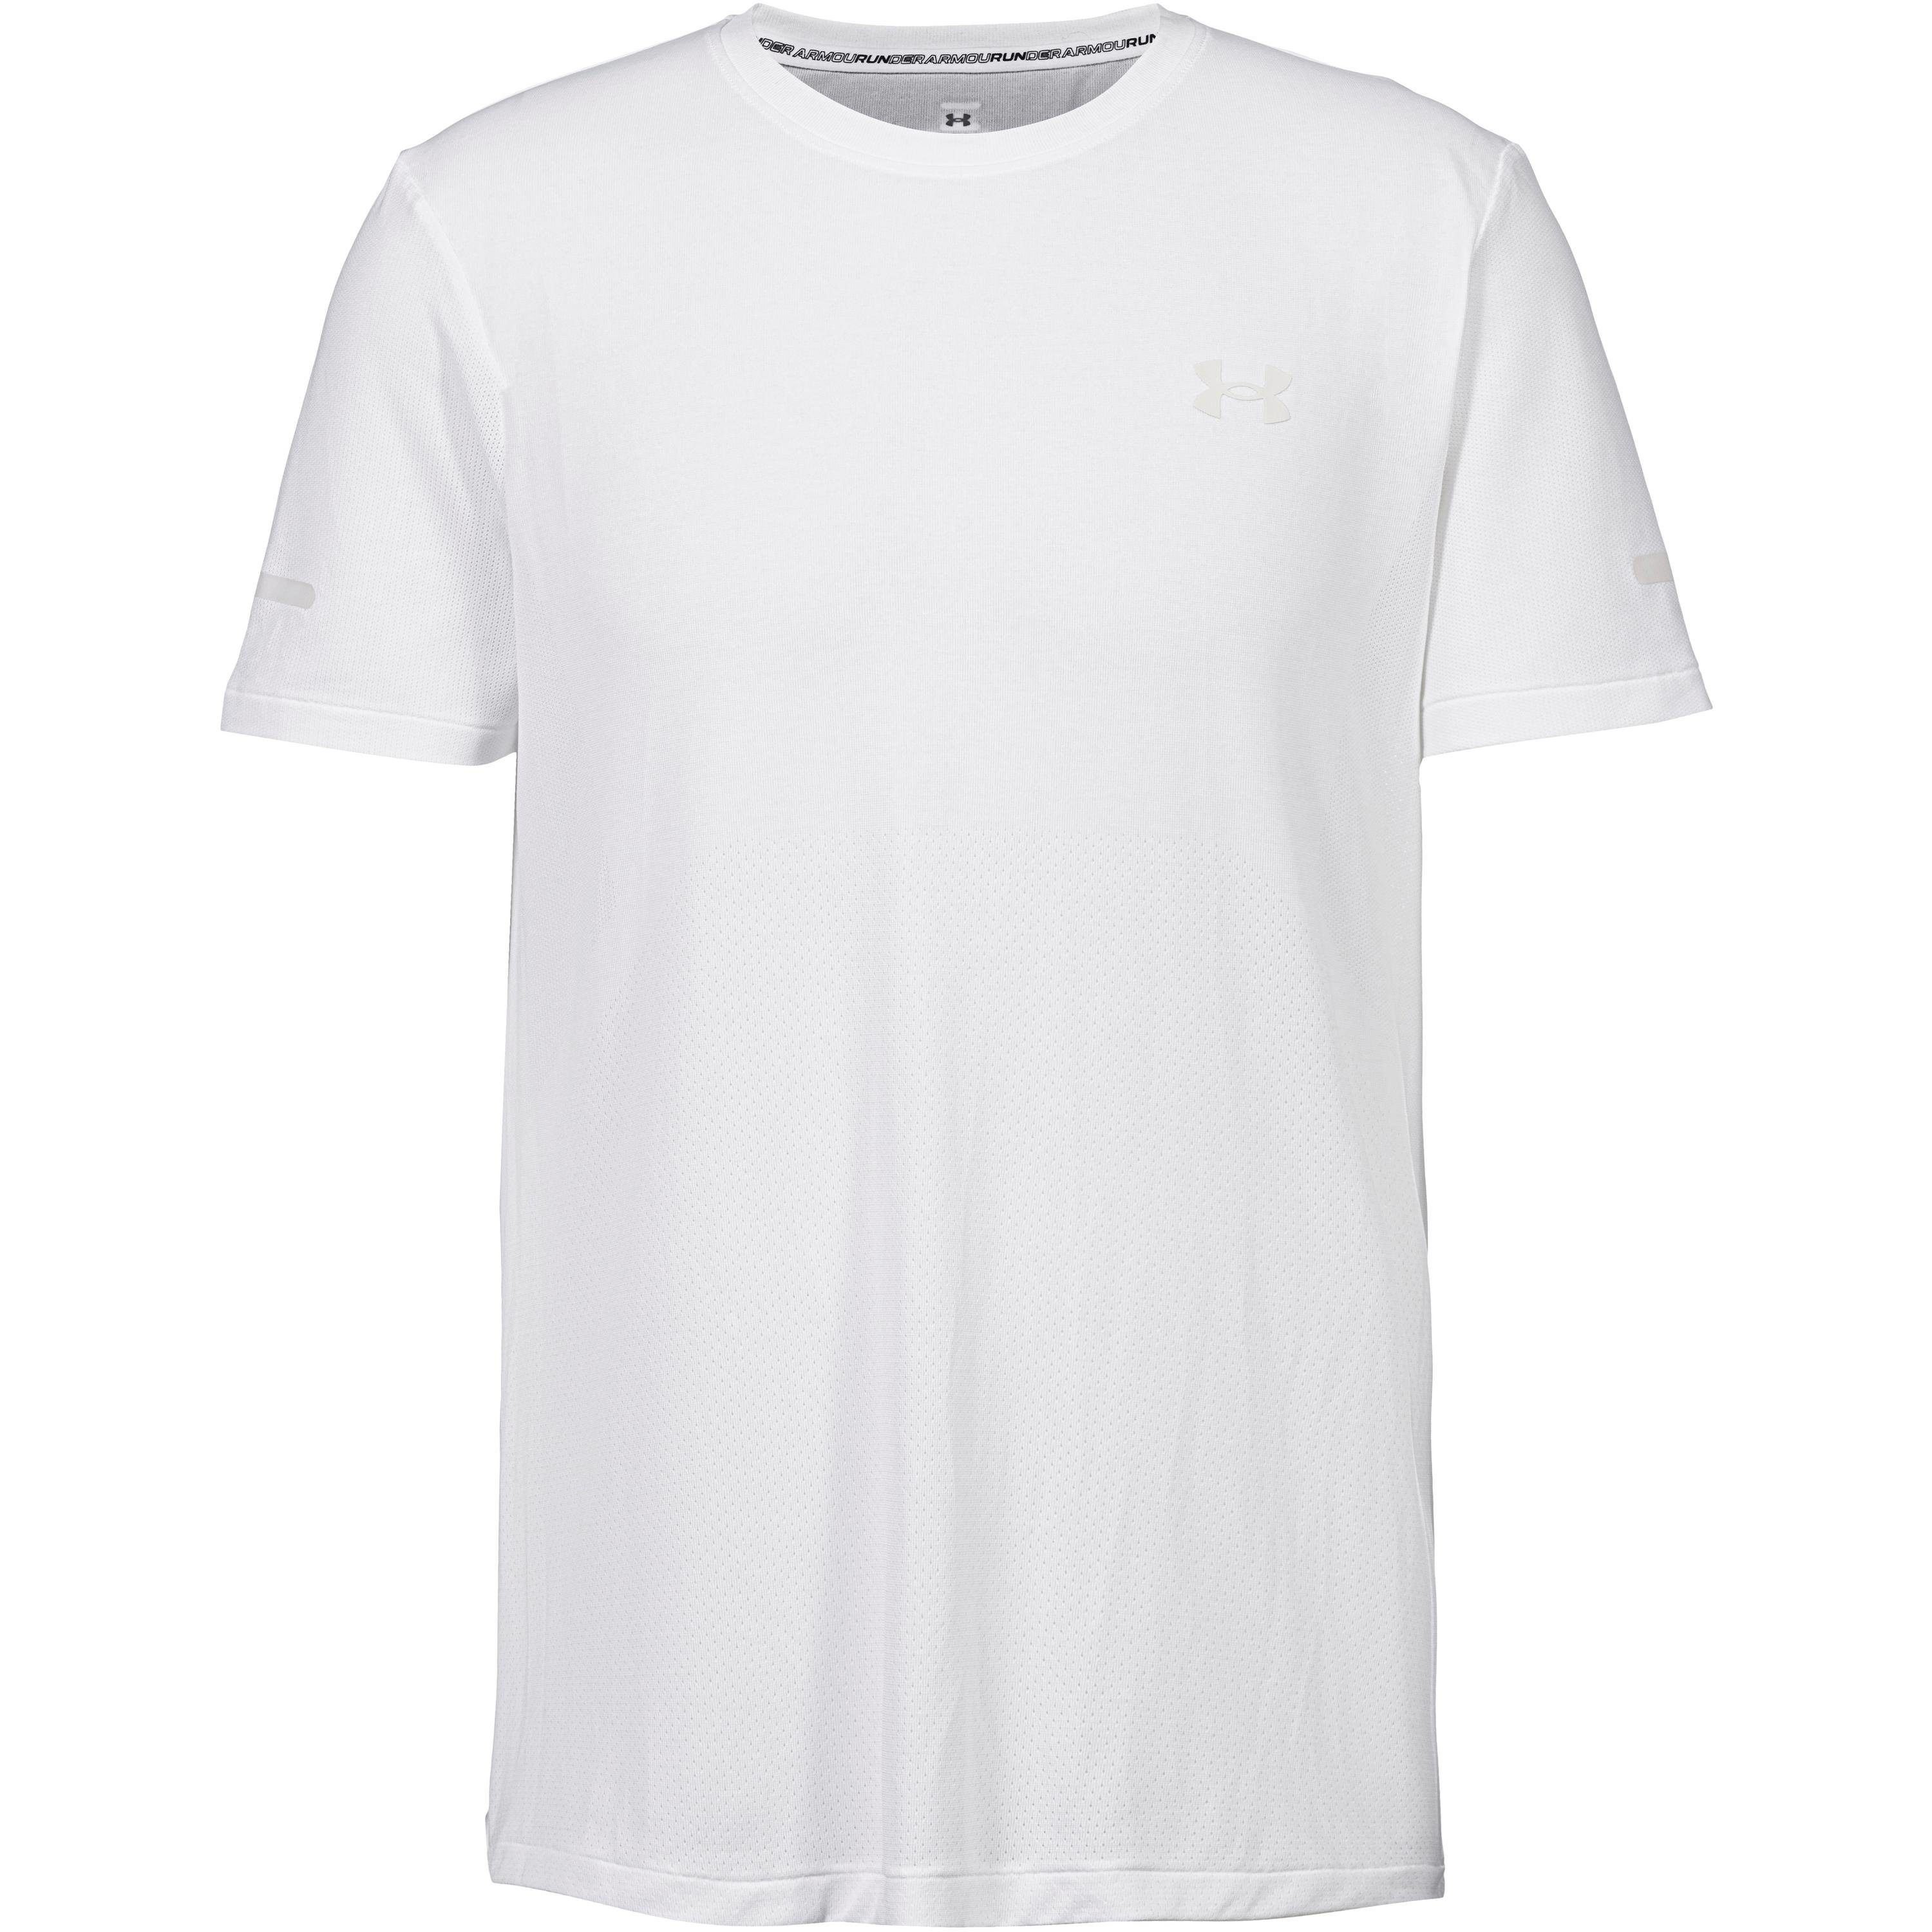 Under Armour® Funktionsshirt SEAMLESS white-reflective